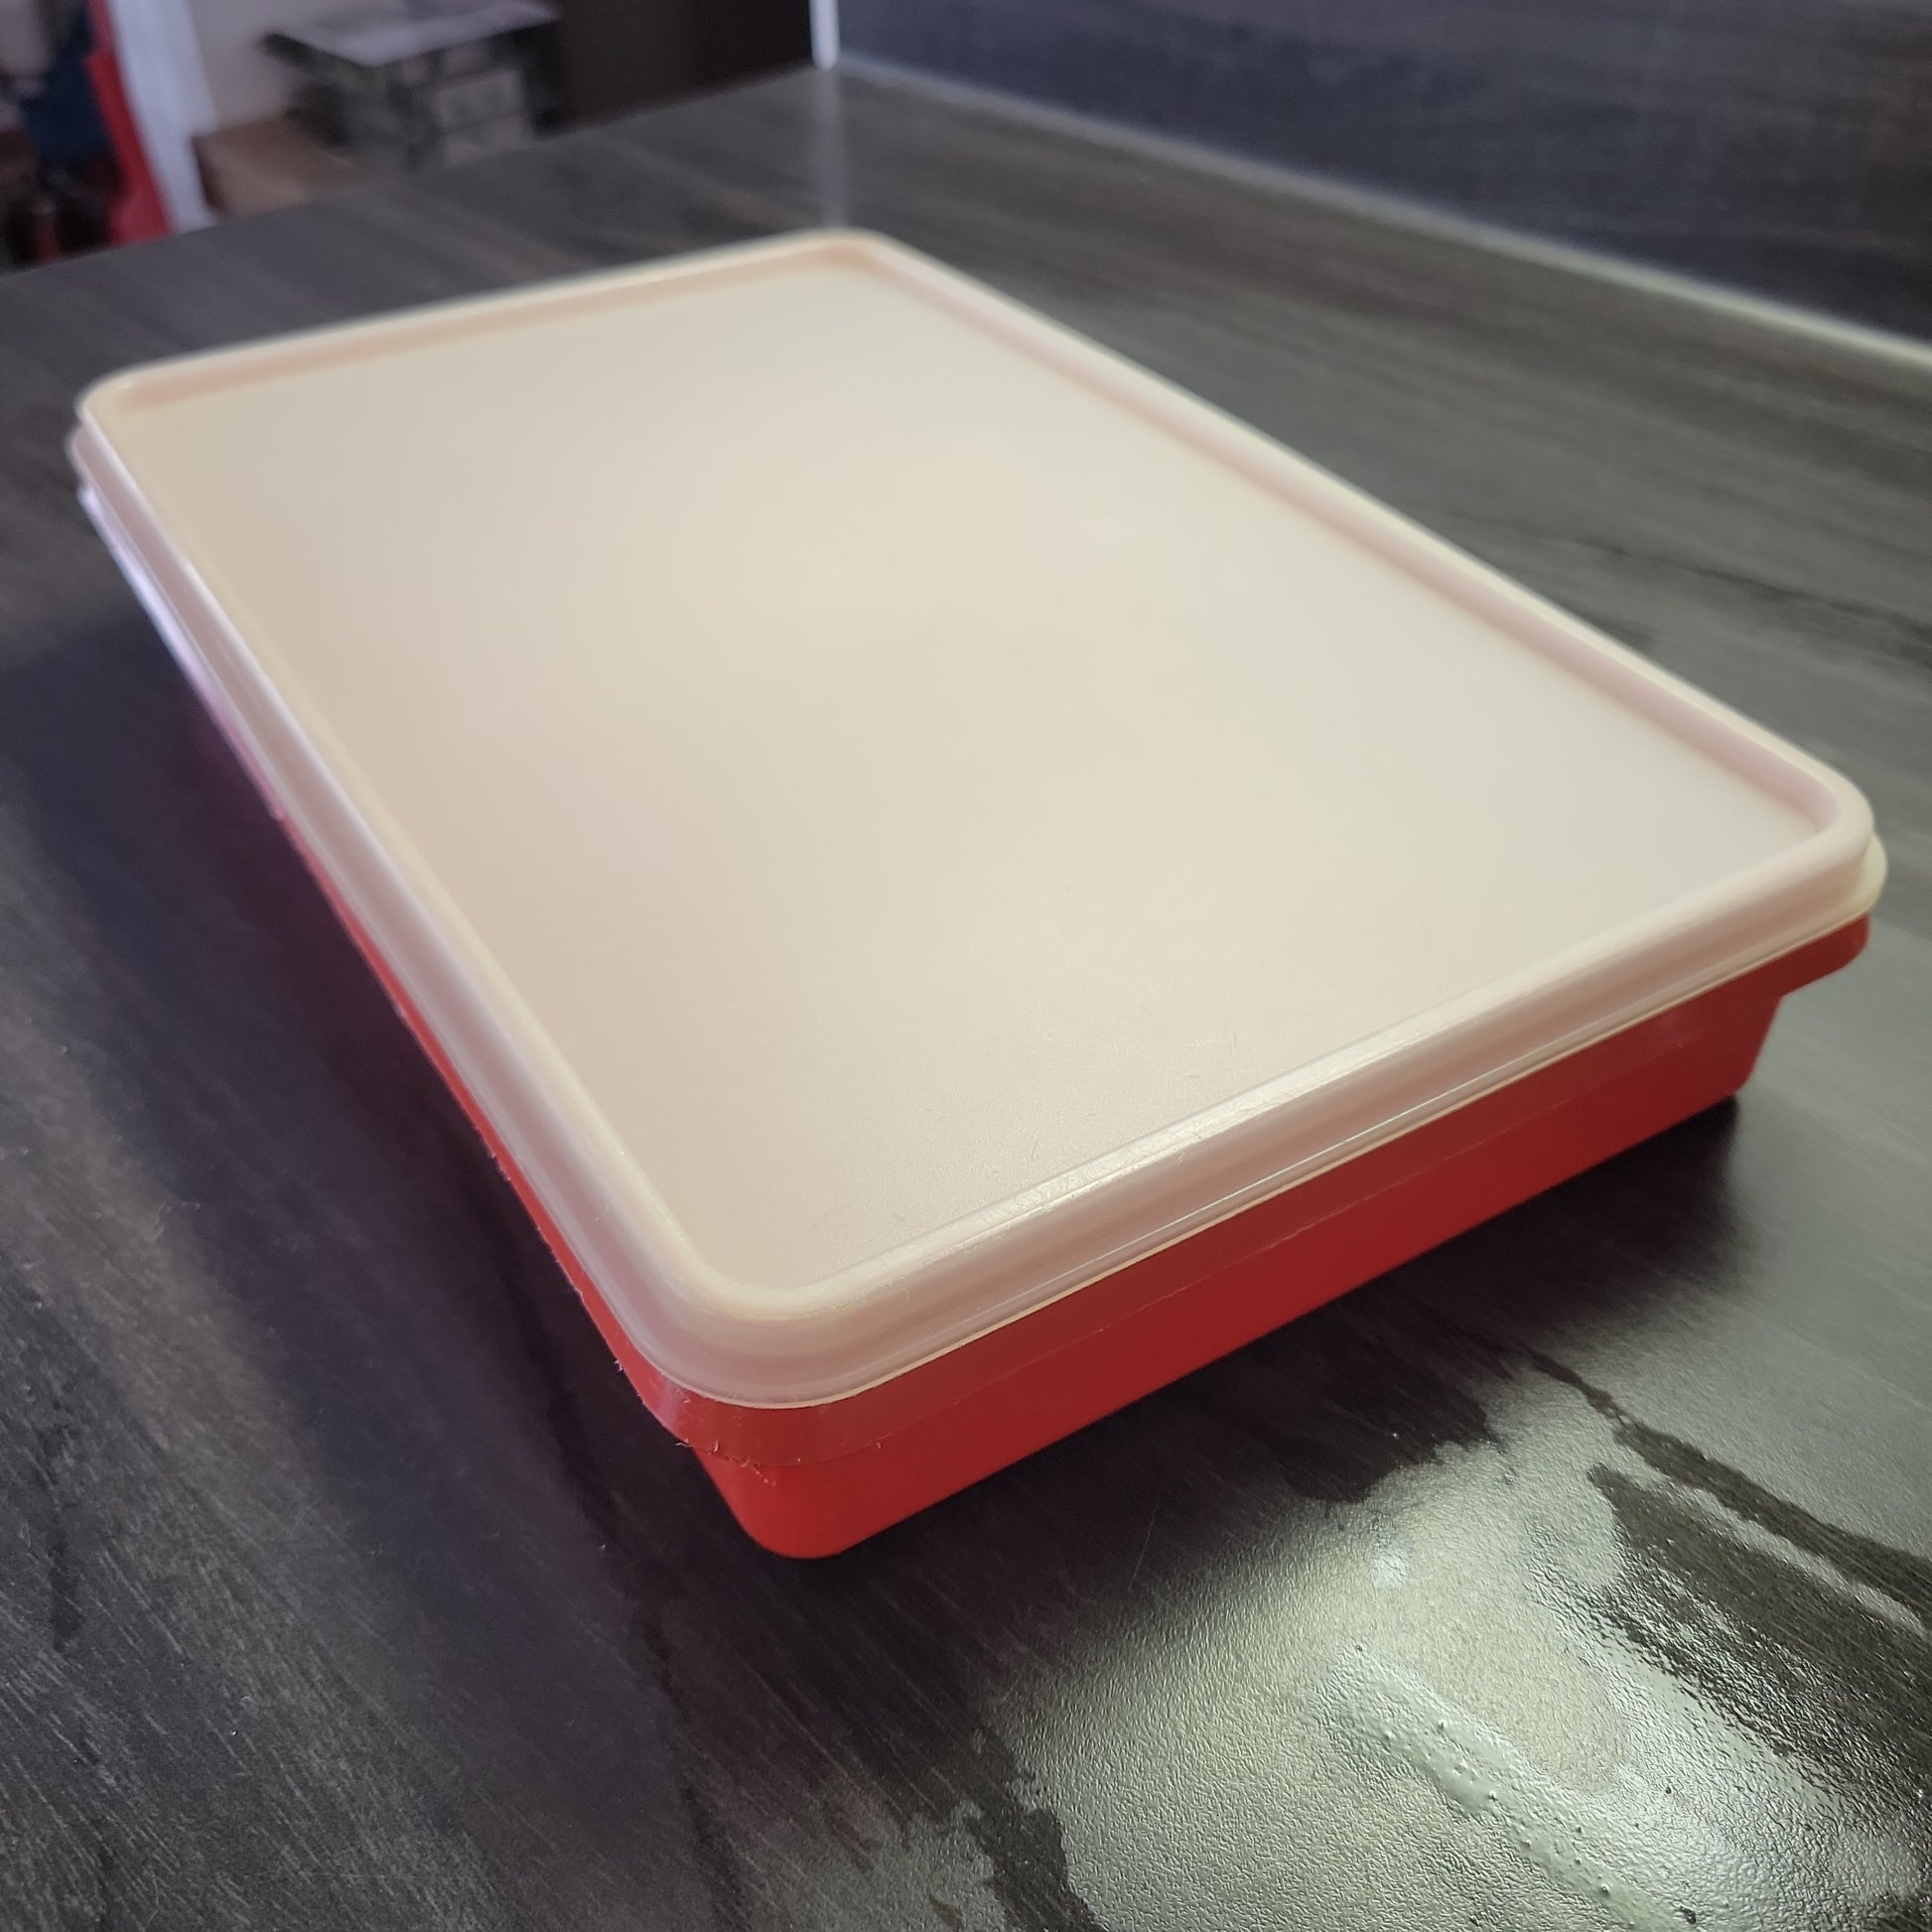 Tupperware #2576 Fridge Stackables Deli/Meat/Cheese Keeper, 1 Tray, Seal  (#4047)